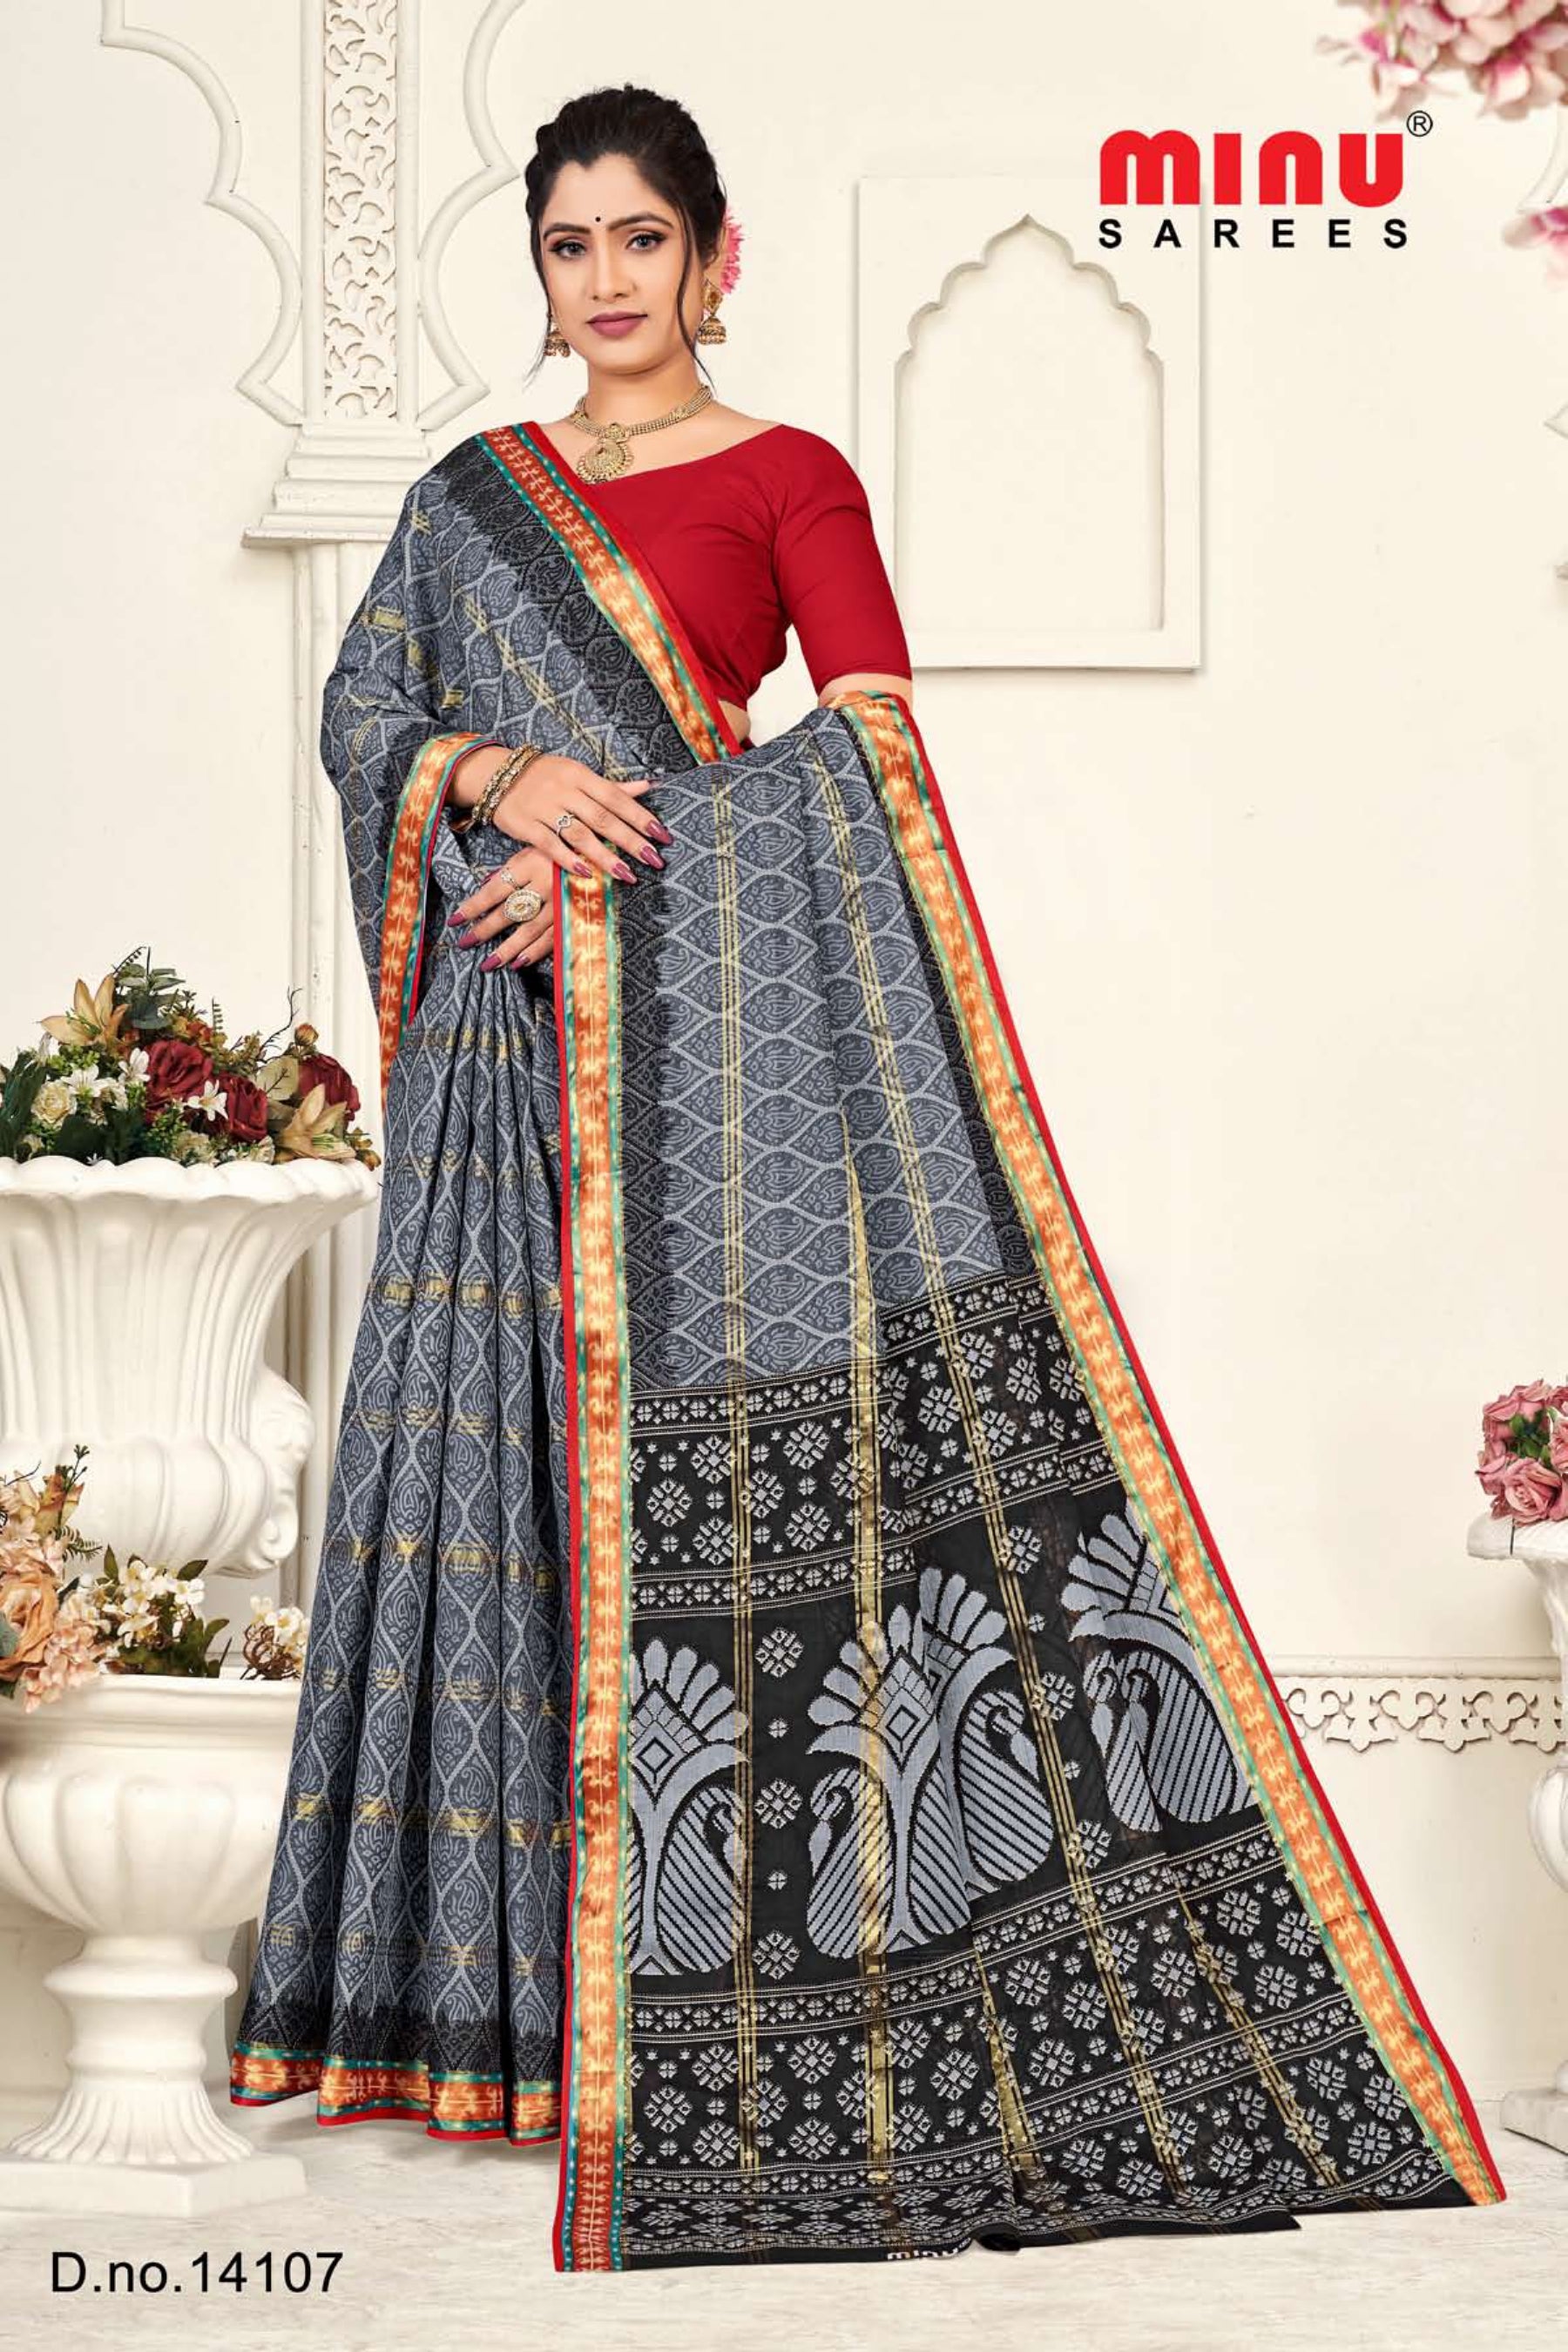 Best offers of pure cotton saree for women and girls 